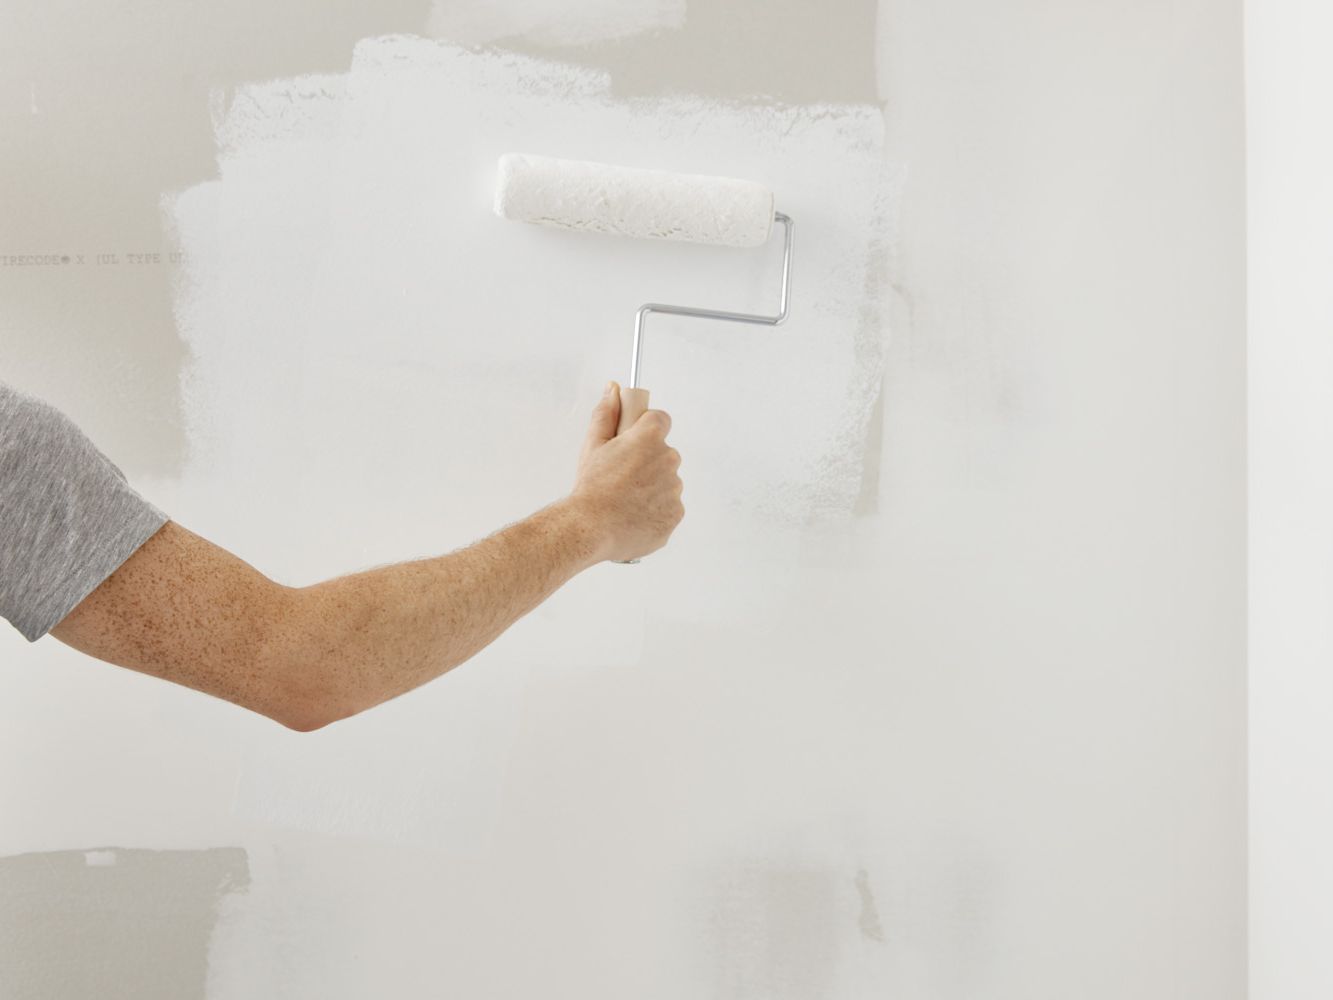 HANG AND PAINT YOUR DRYWALL